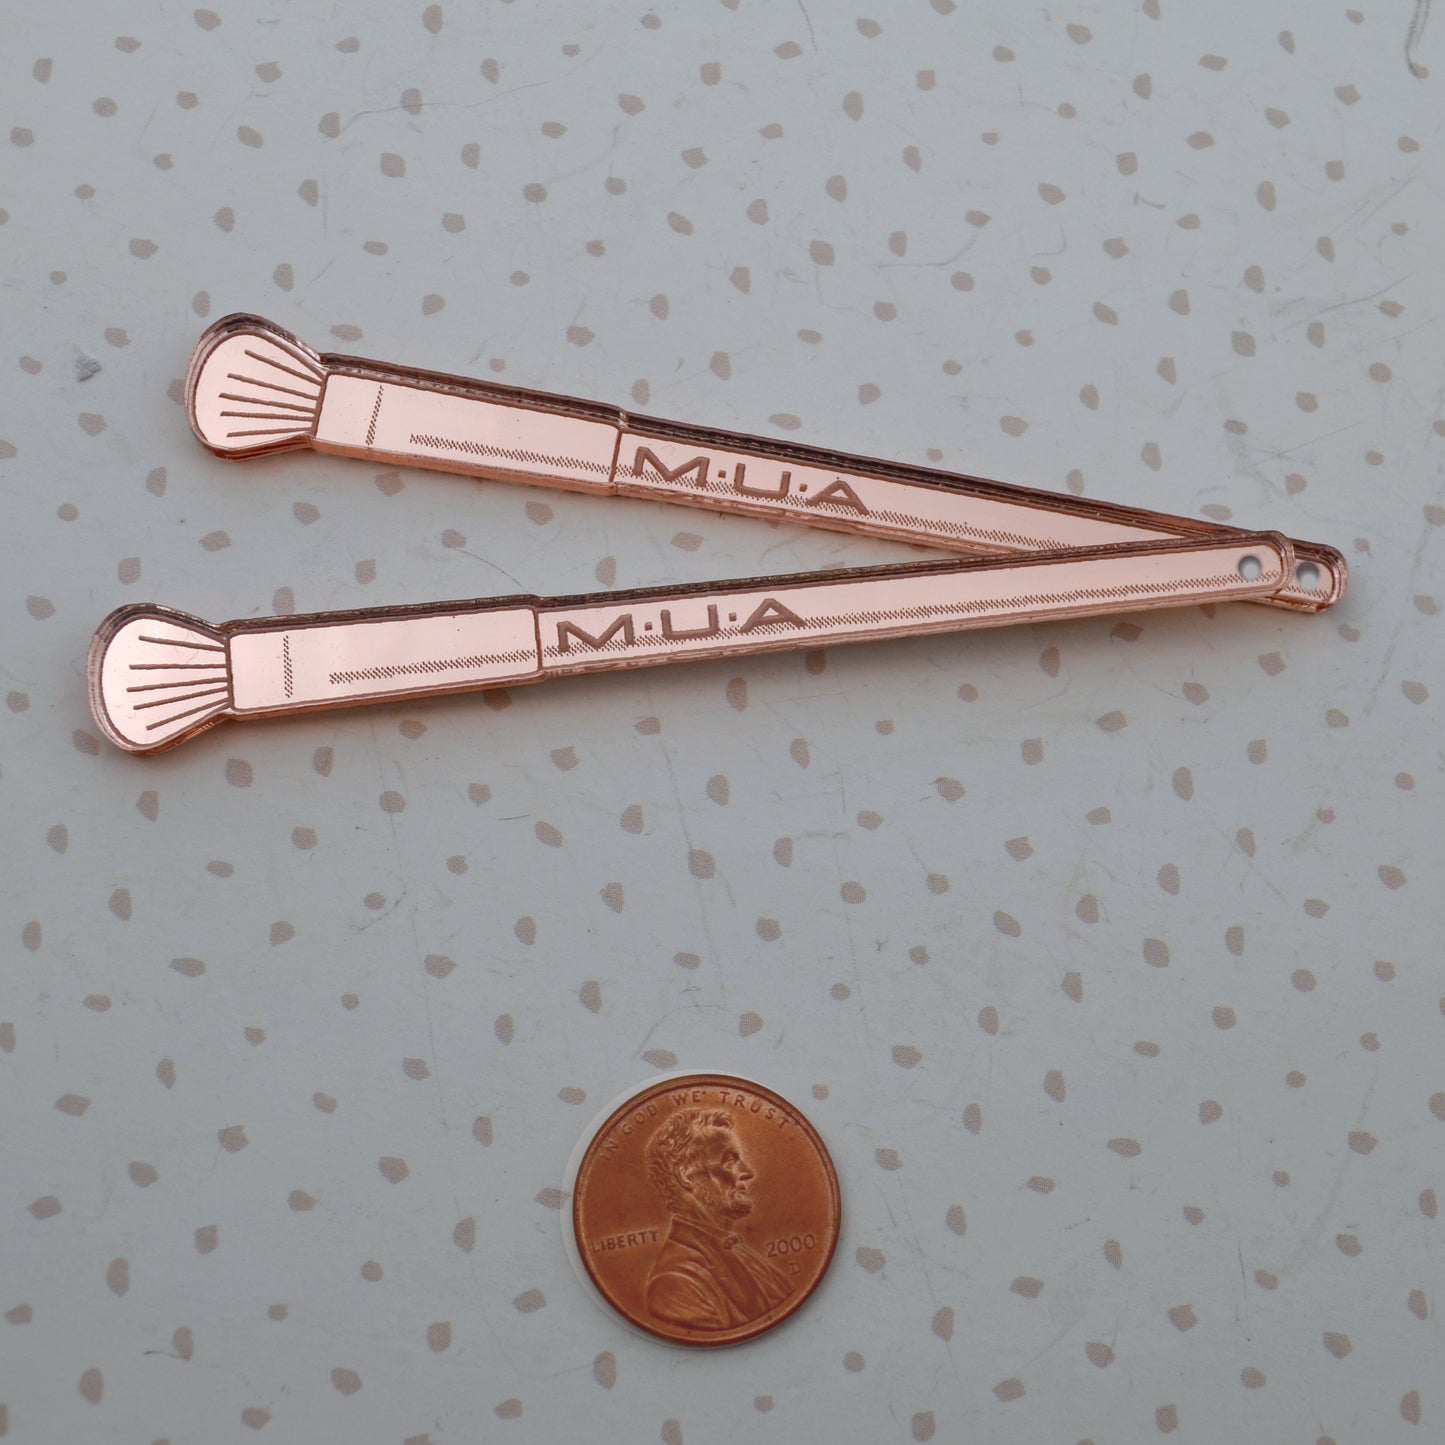 MAKEUP BRUSH CHARMS - Rose Gold Laser Cut Acrylic - 2 Pieces - Mac - Deco - Jewelry